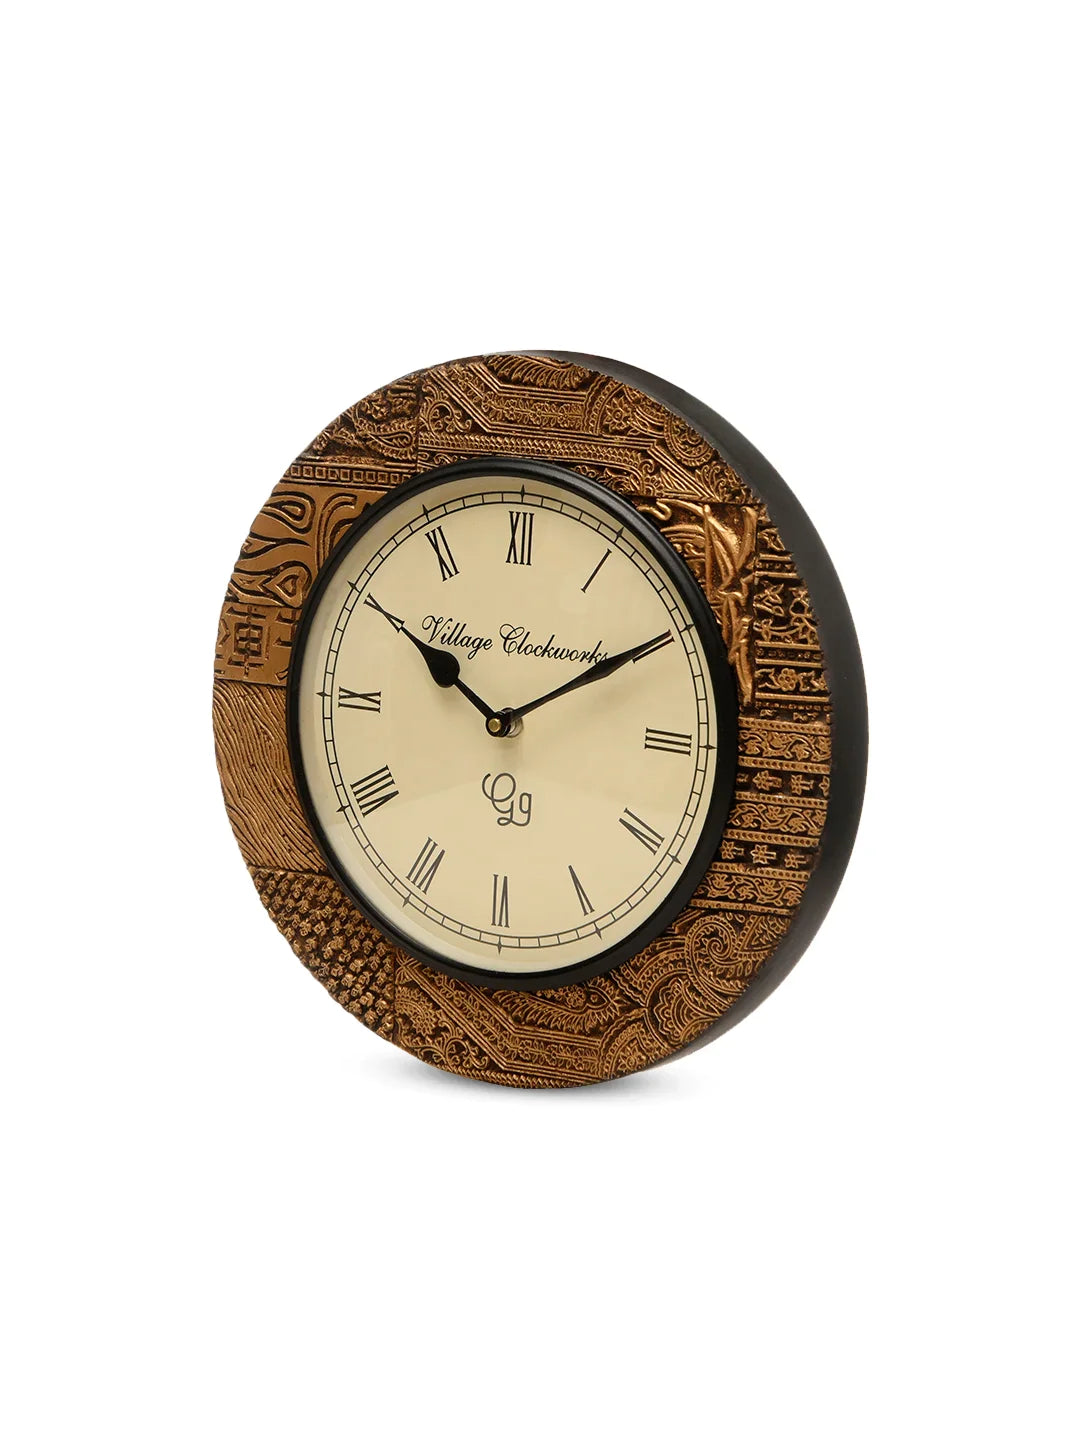 Round Wooden Block Golden 12 Inches Analog Wall Clock